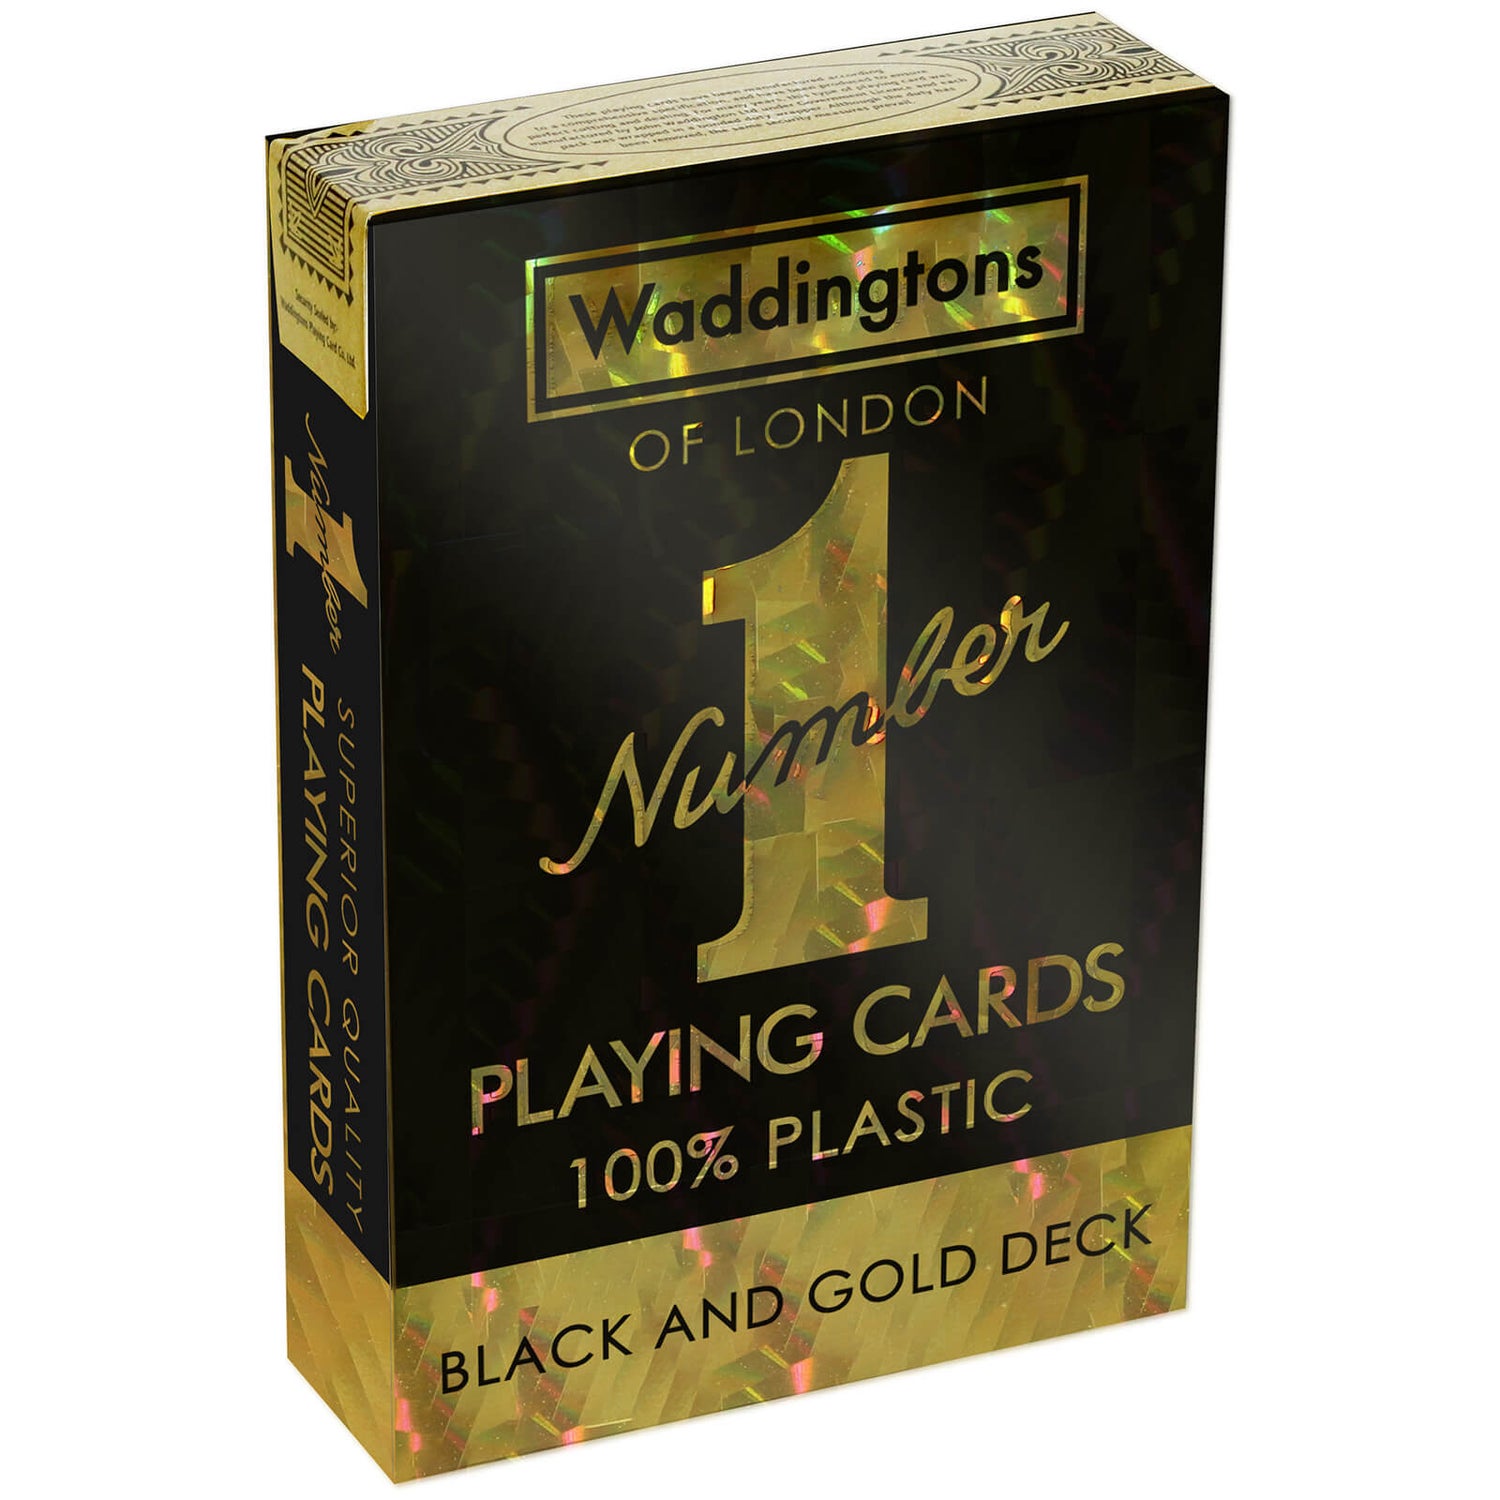 Black and Gold Waddingtons No 1 Playing Cards